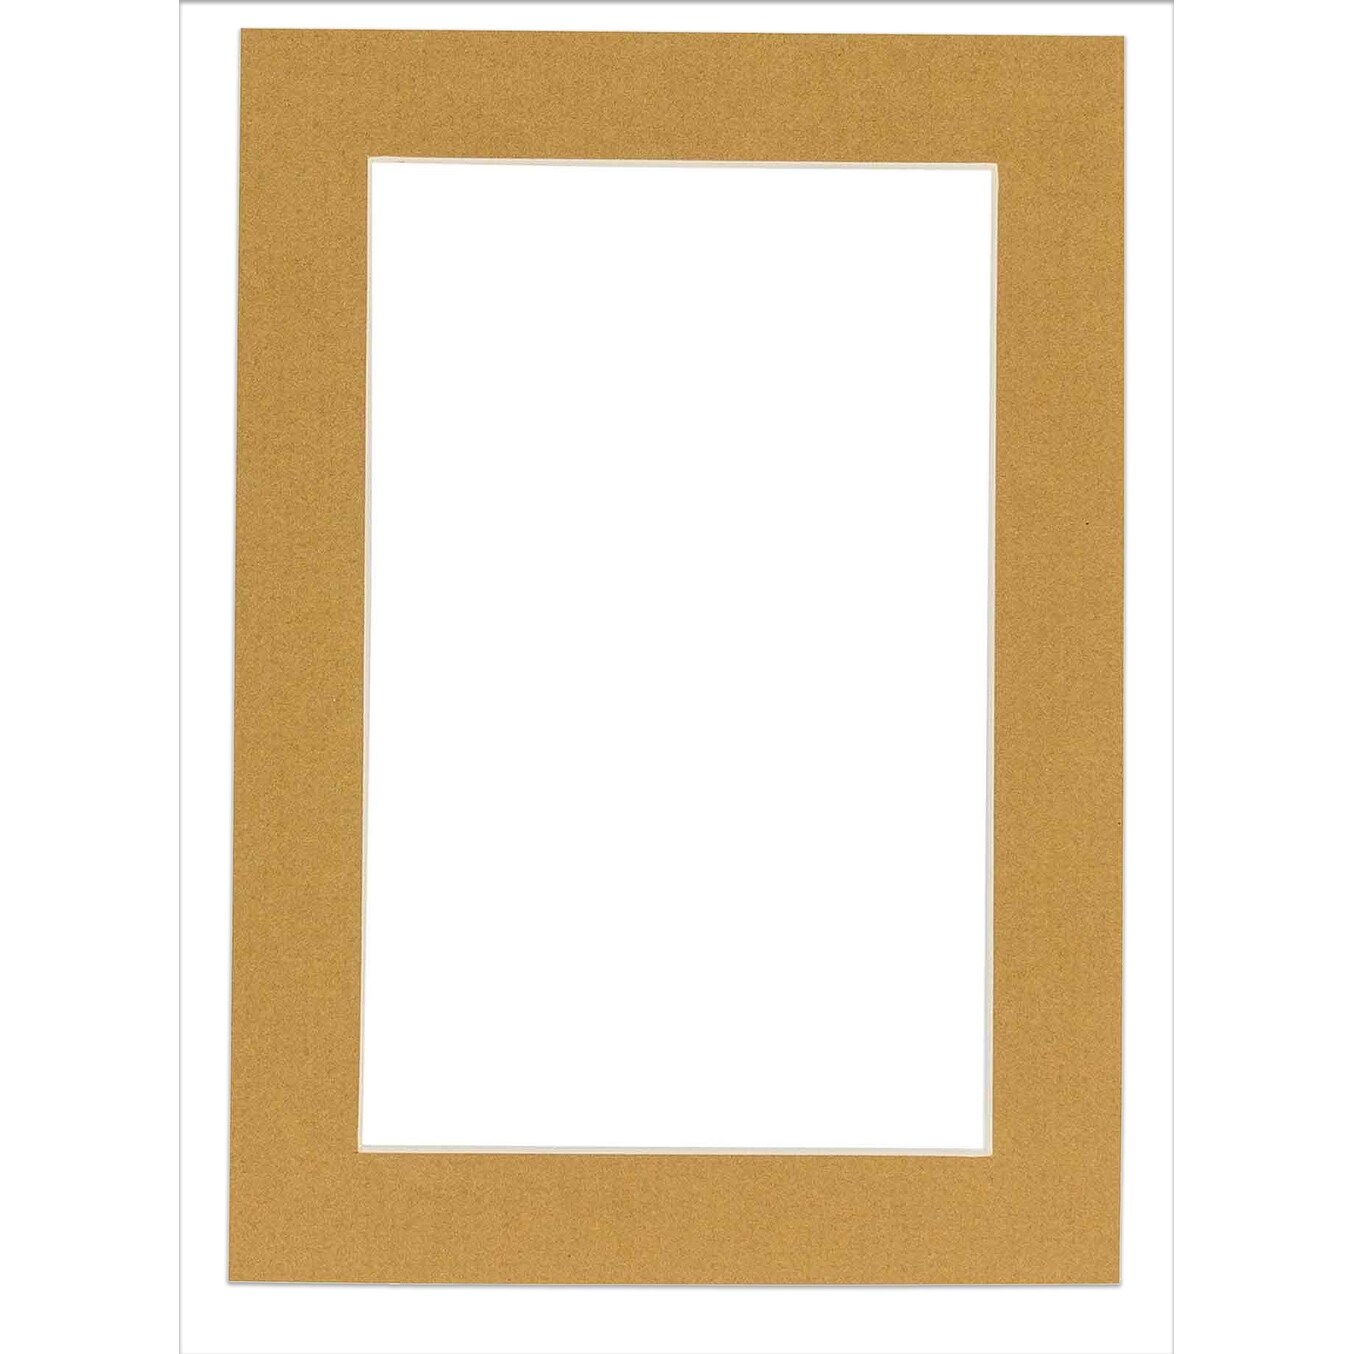 16x20 Mat Bevel Cut for 13x17 Photos - Acid Free Metallic Gold Precut  Matboard - For Pictures, Photos, Framing - 4-ply Thickness